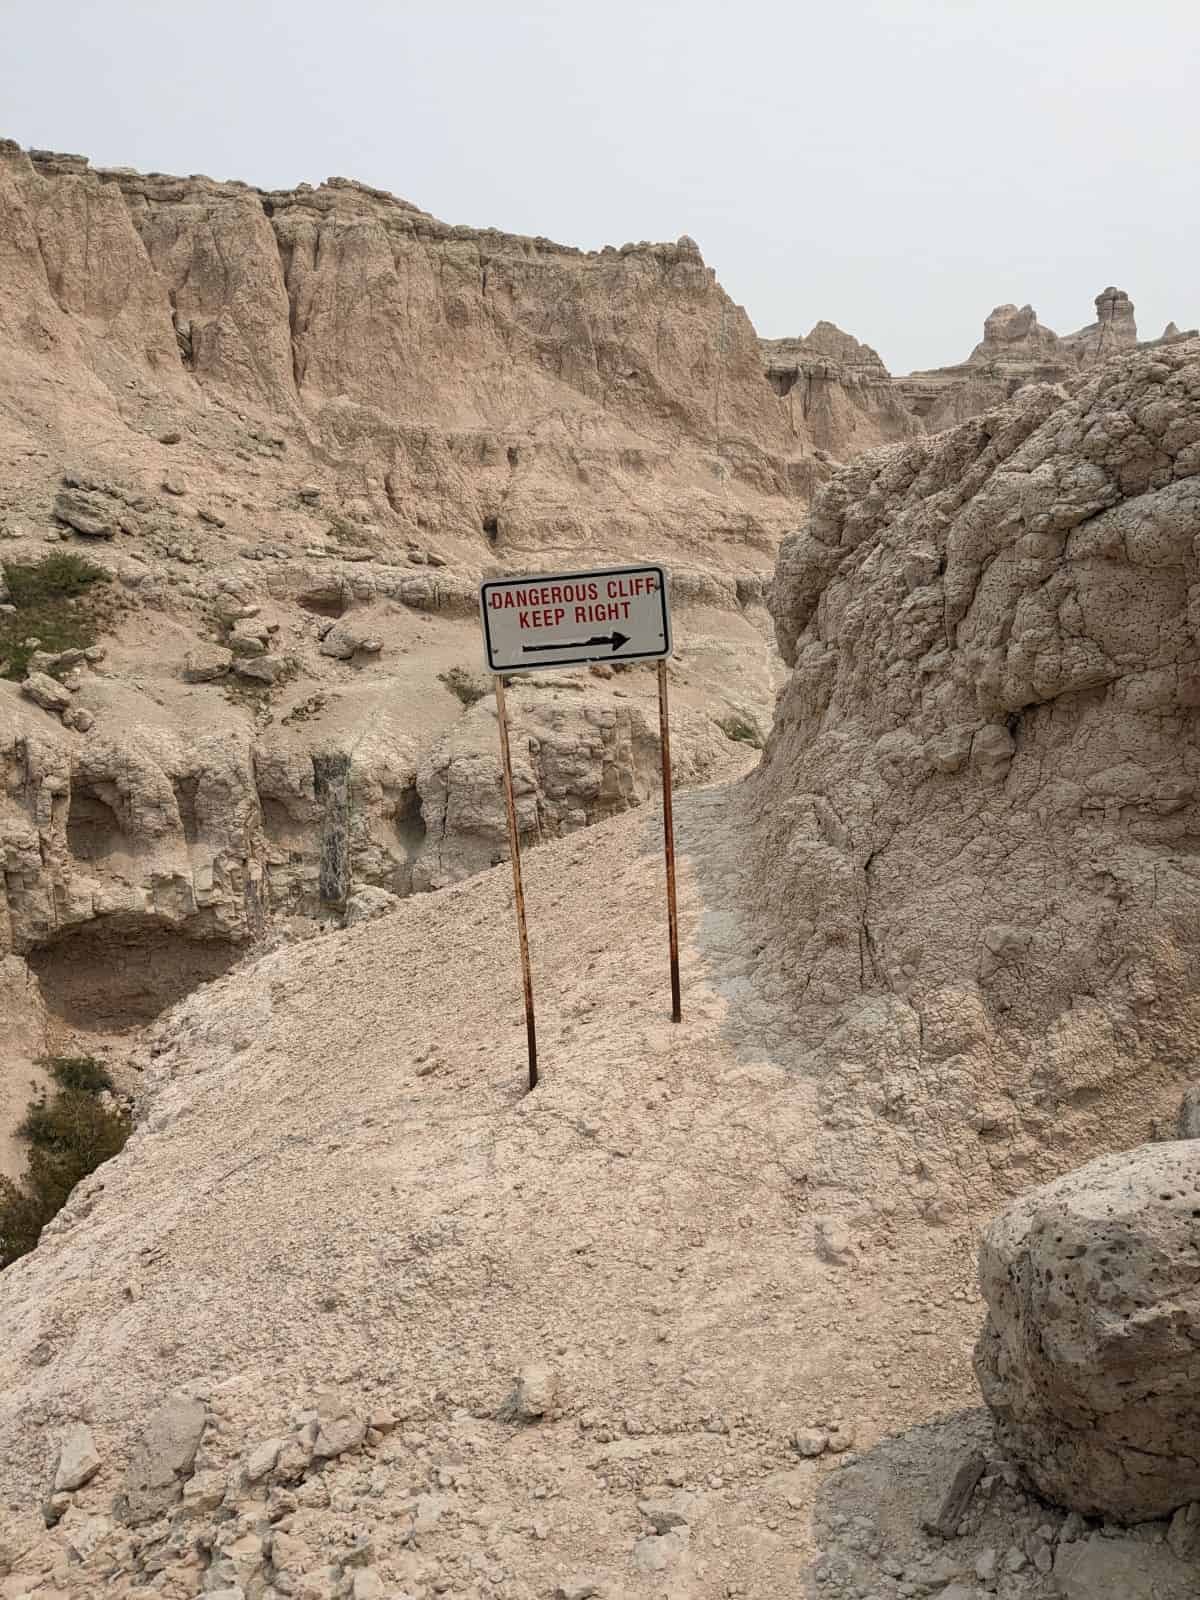 Metal sign on a rock cliff edge. Sign says dangerous cliff keep right.